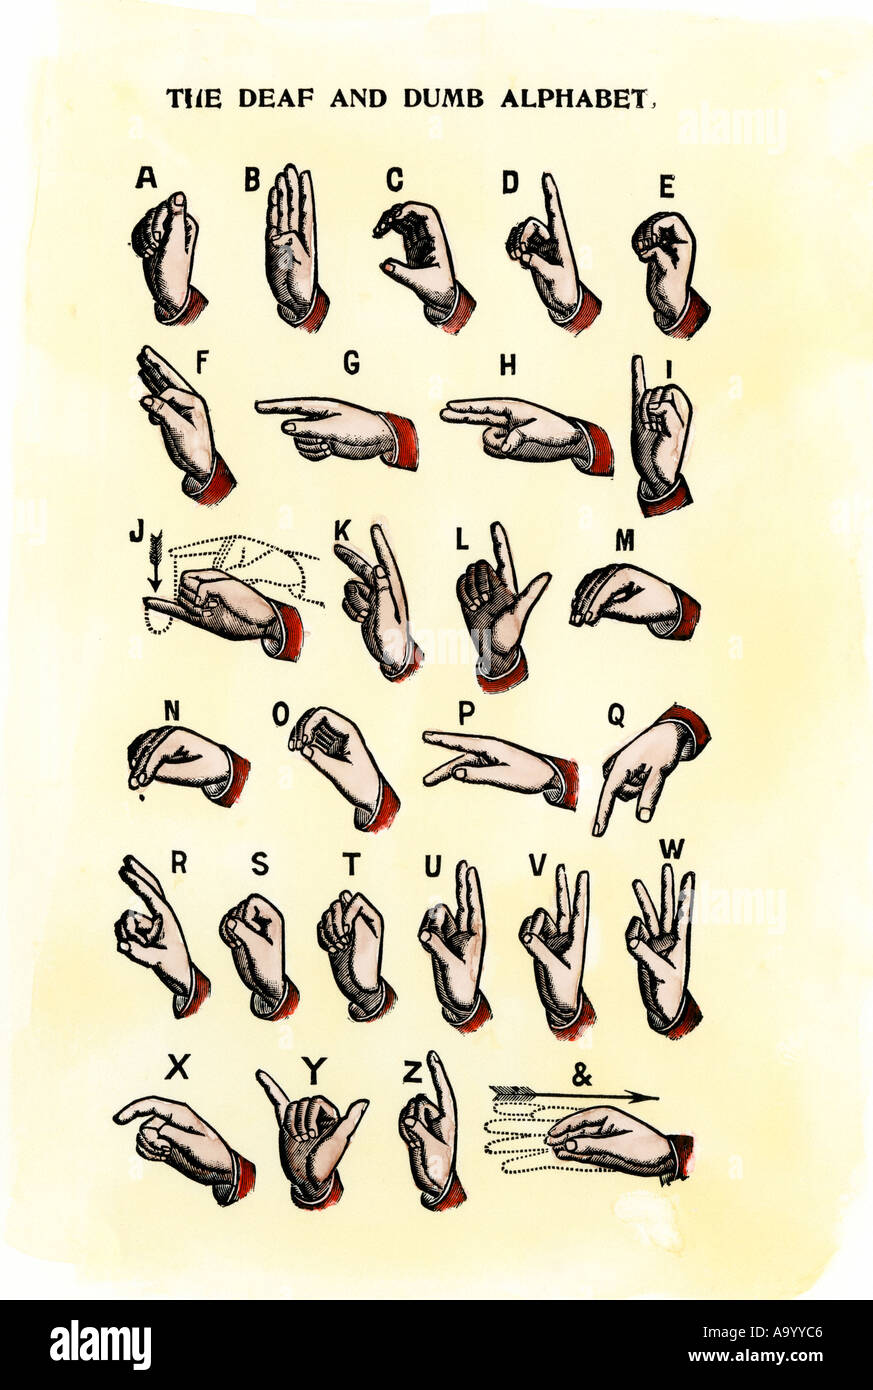 Single handed alphabet in sign language used in the US 1800s. Hand-colored woodcut Stock Photo